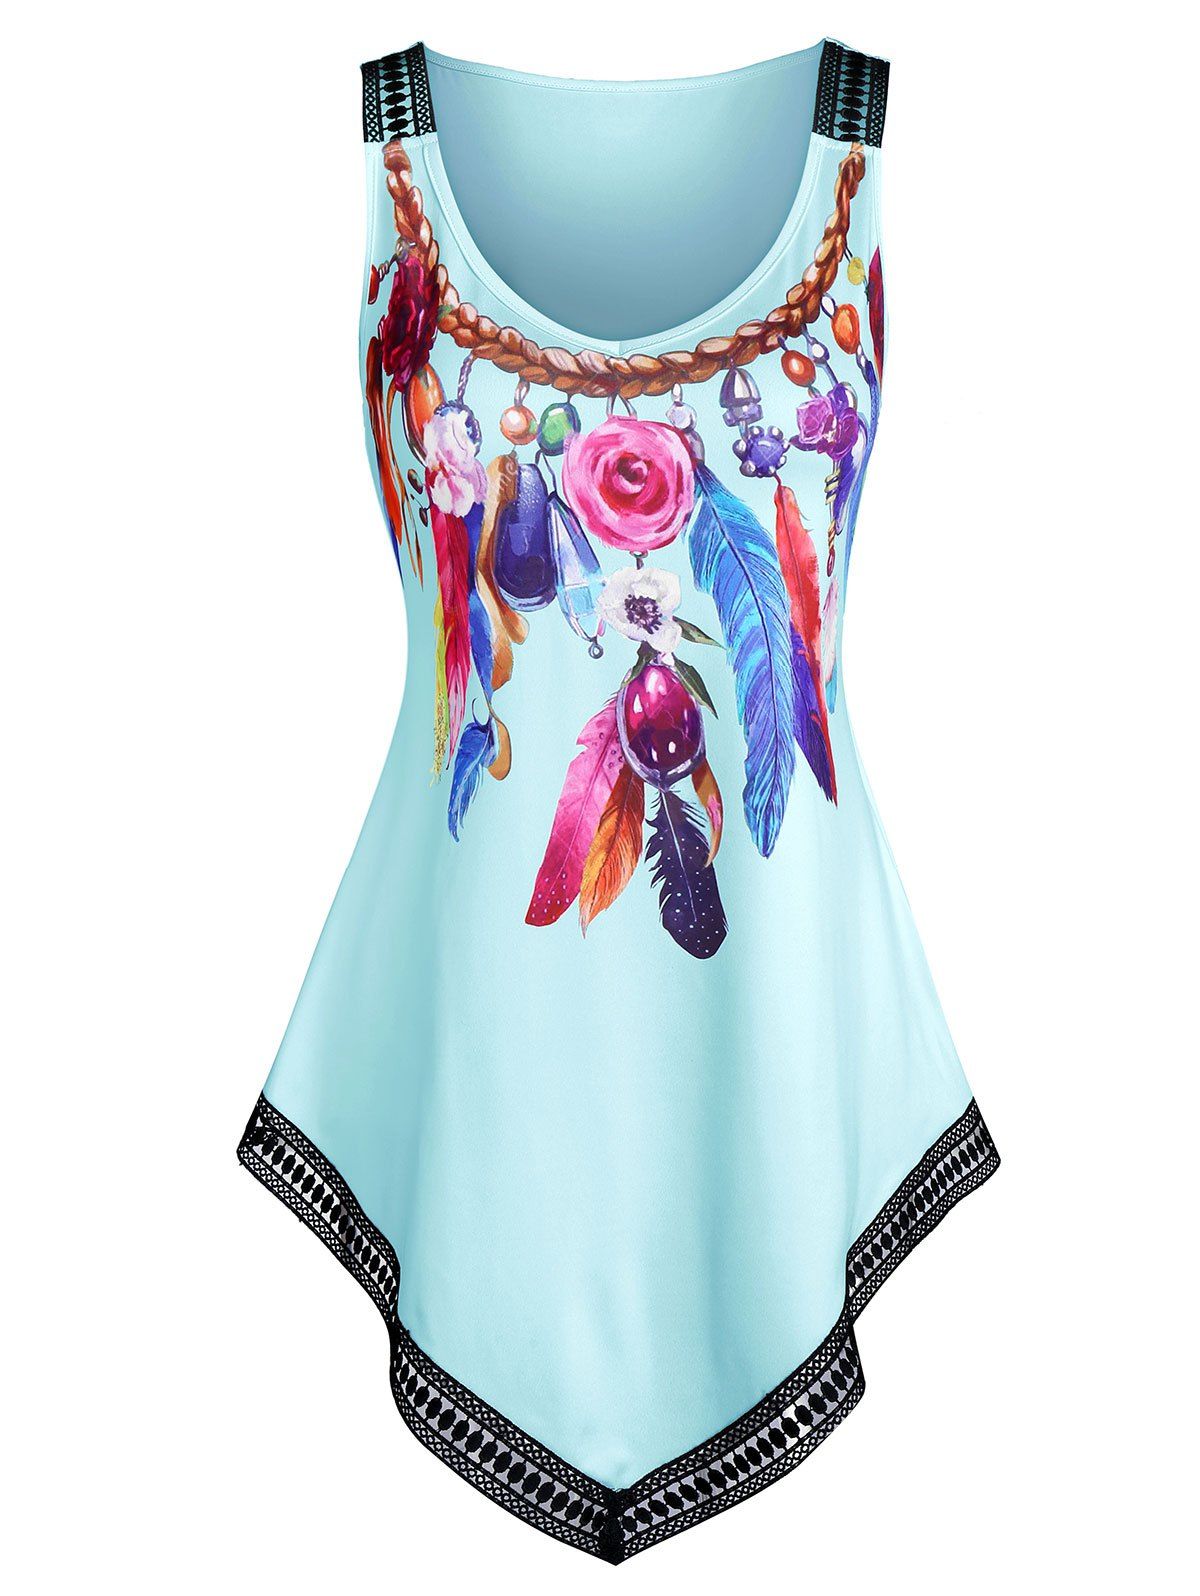 Colorful Feather Print Lace Trim Tank Top - BABY BLUE S